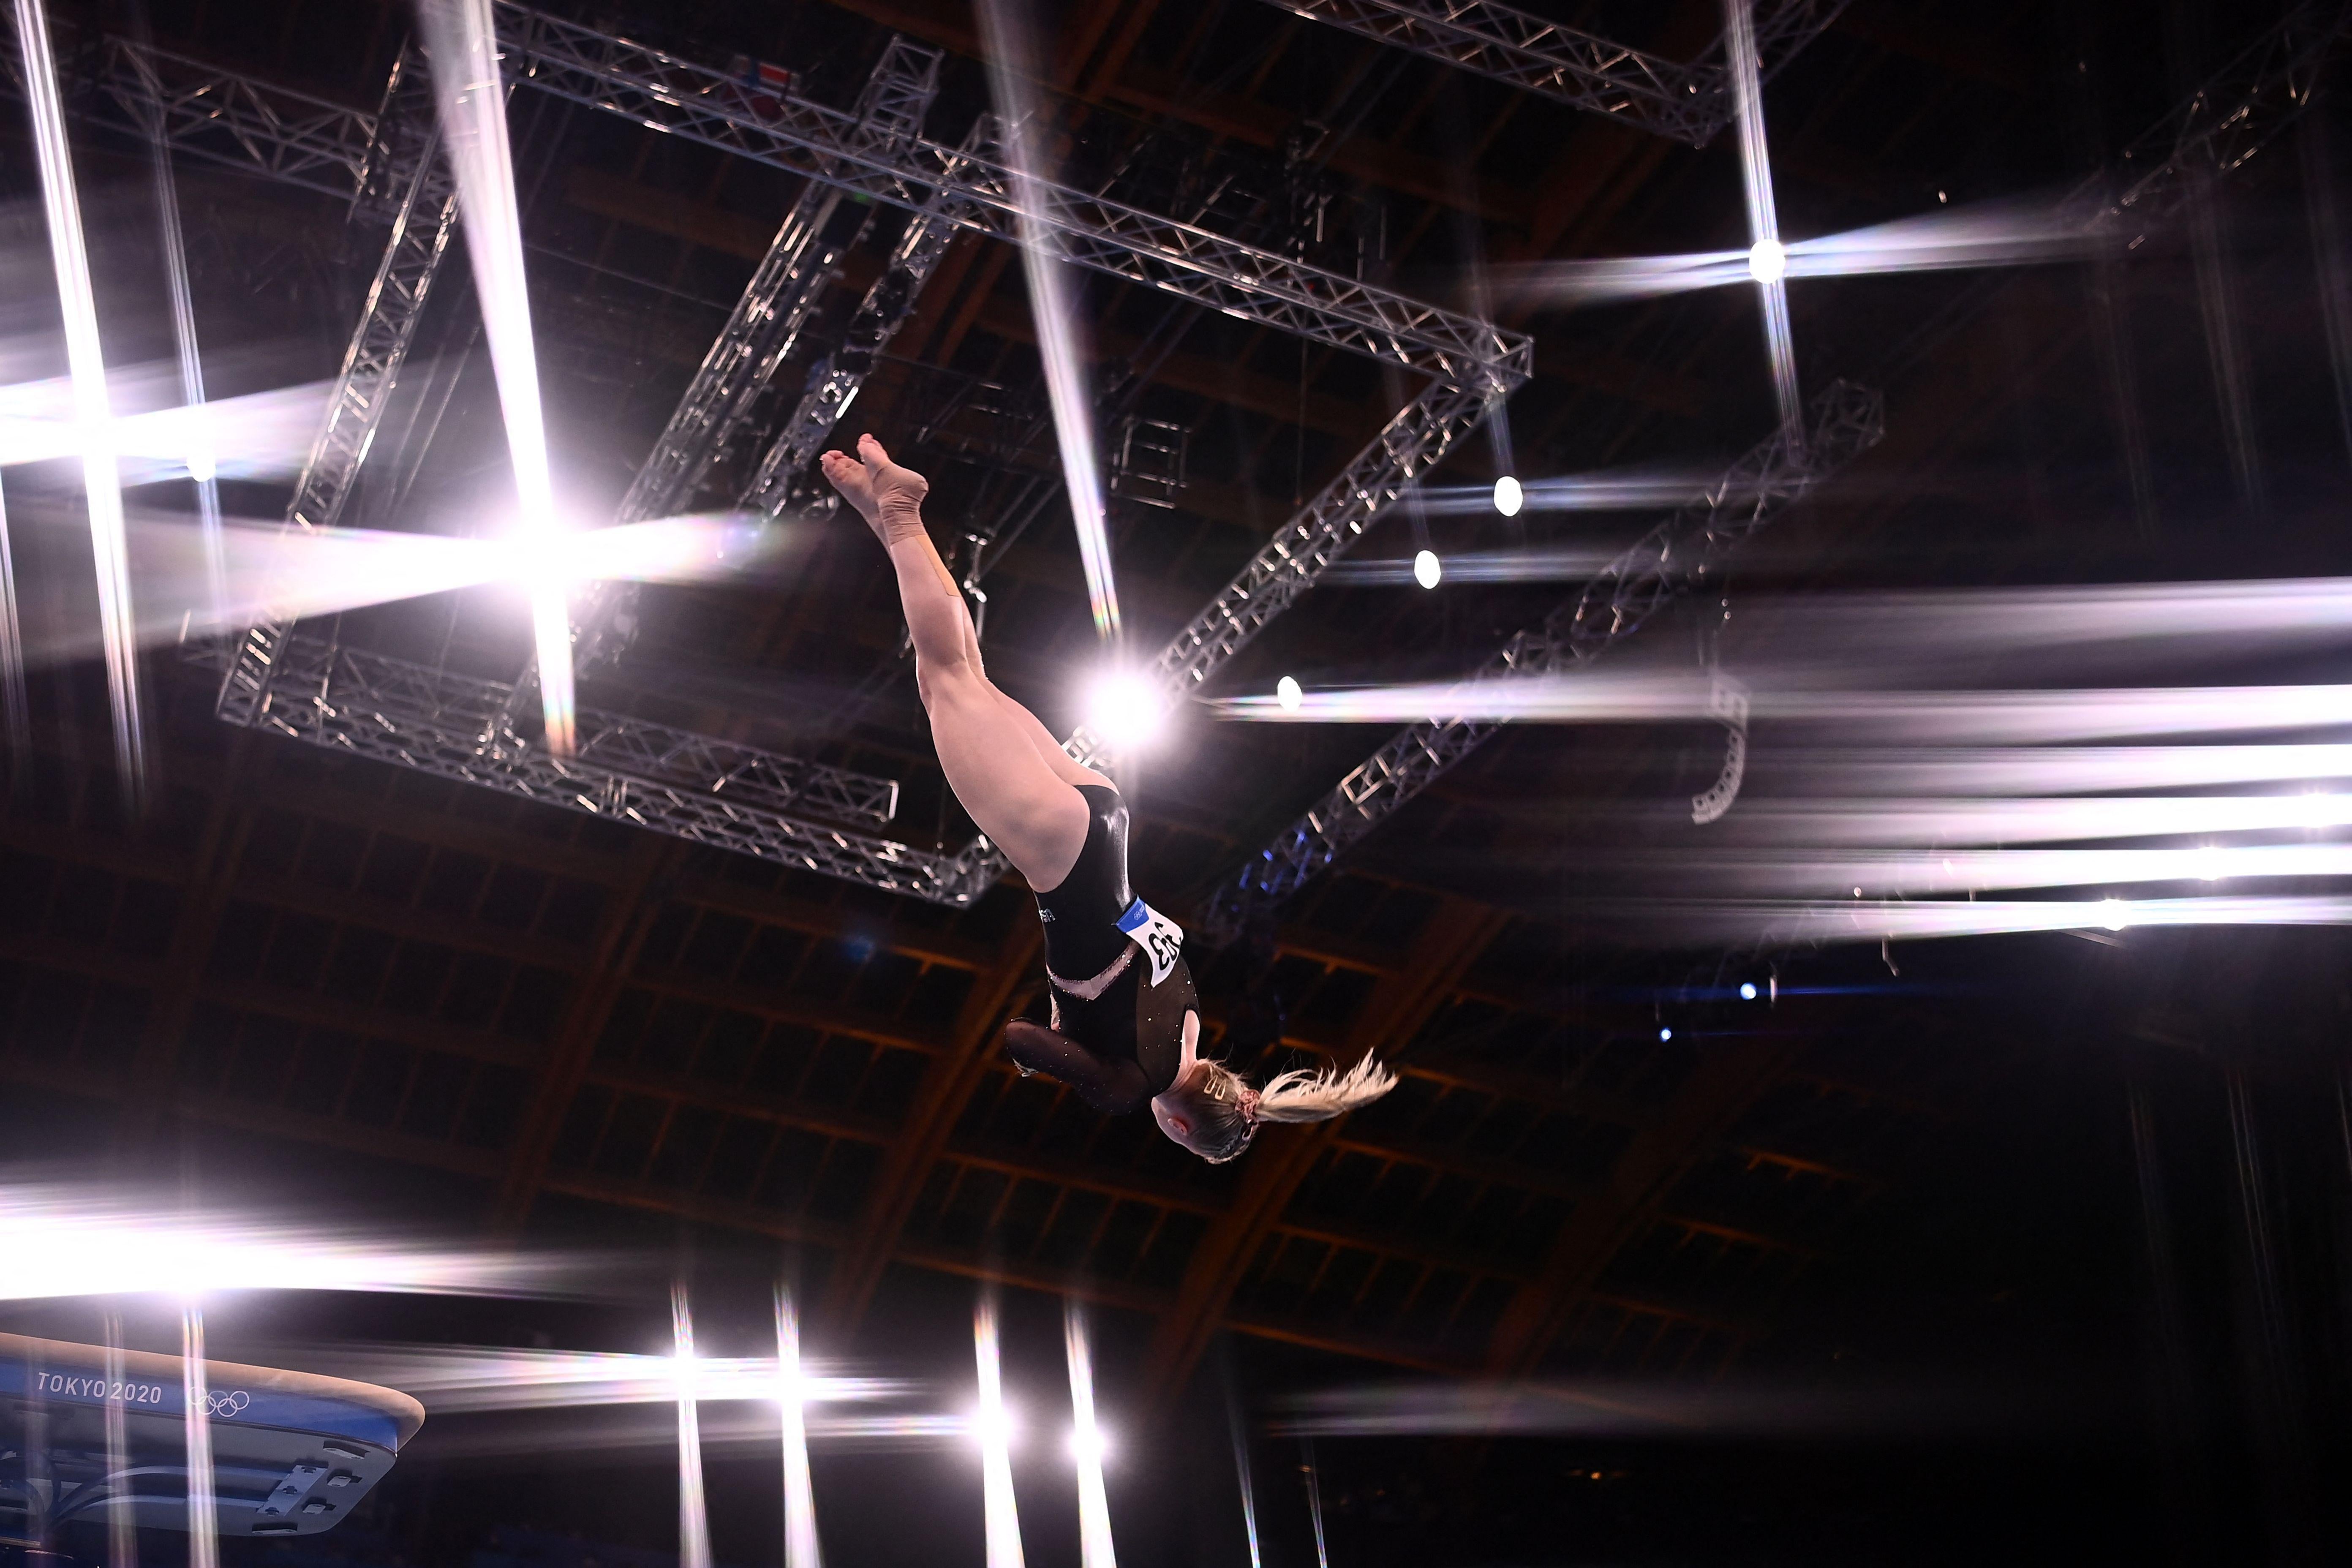 Carey twists upside down in midair, with the stadium lights flashing and beaming all around her